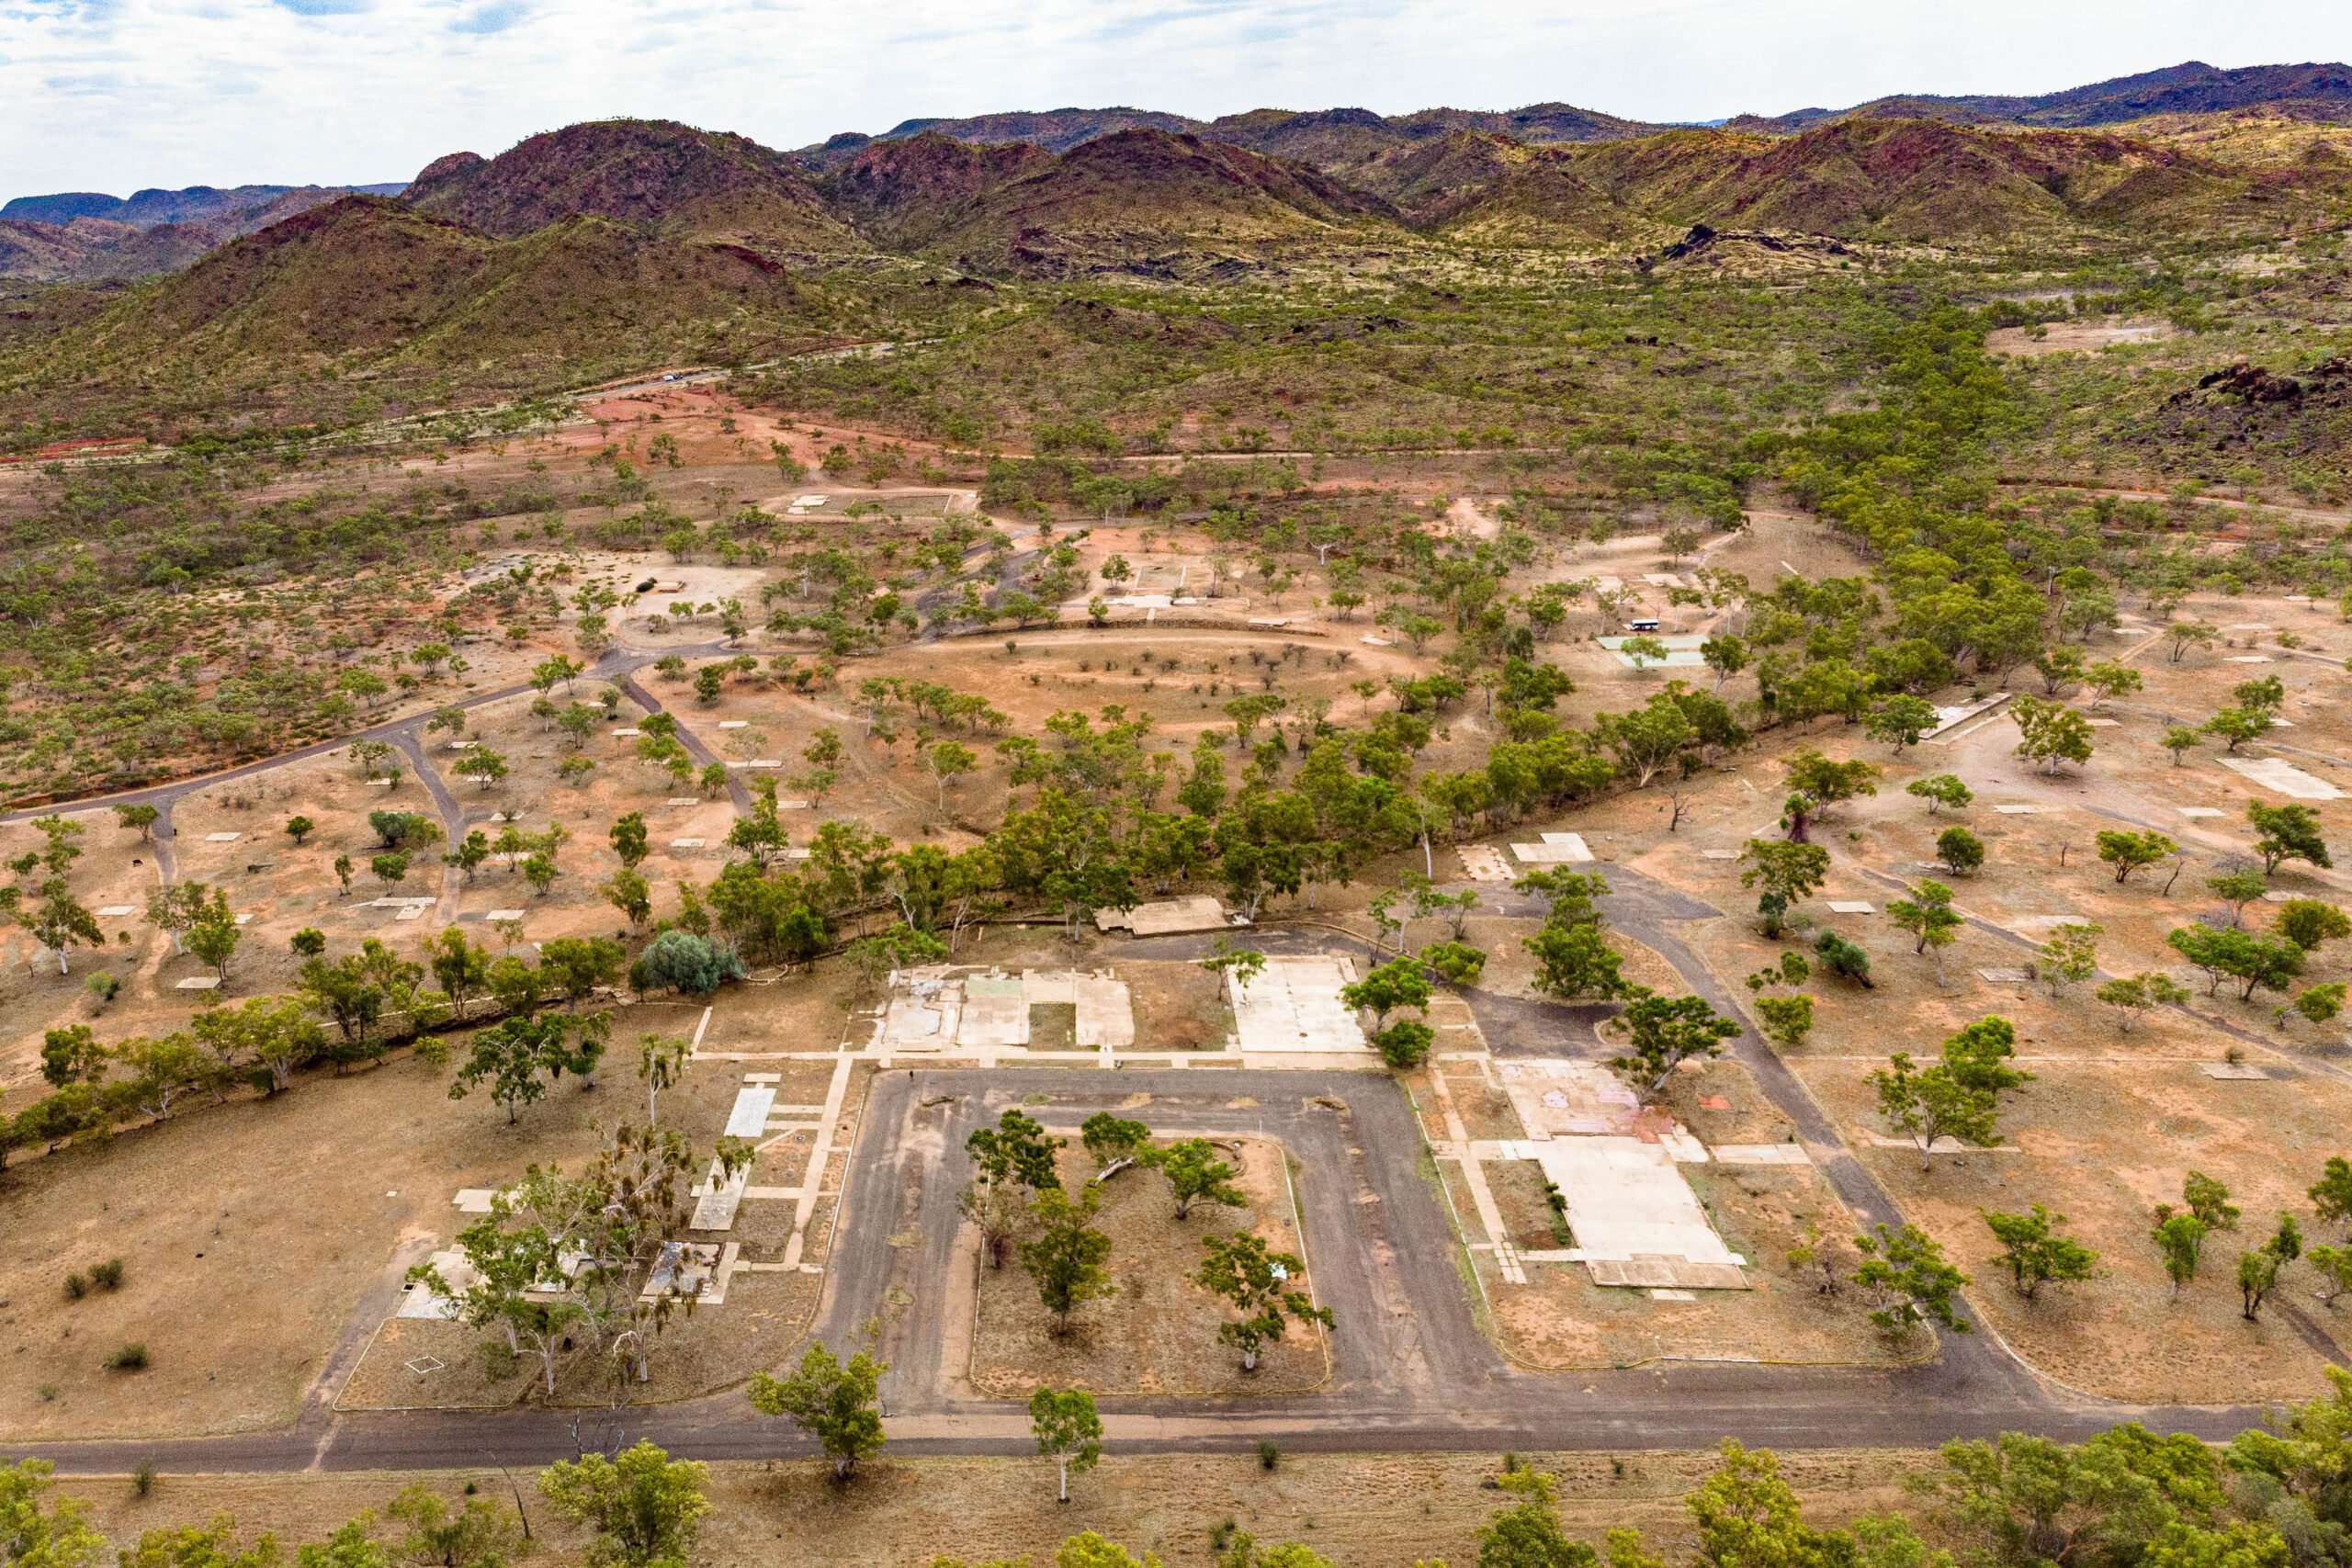 Image for article: The outback town that was sold for parts